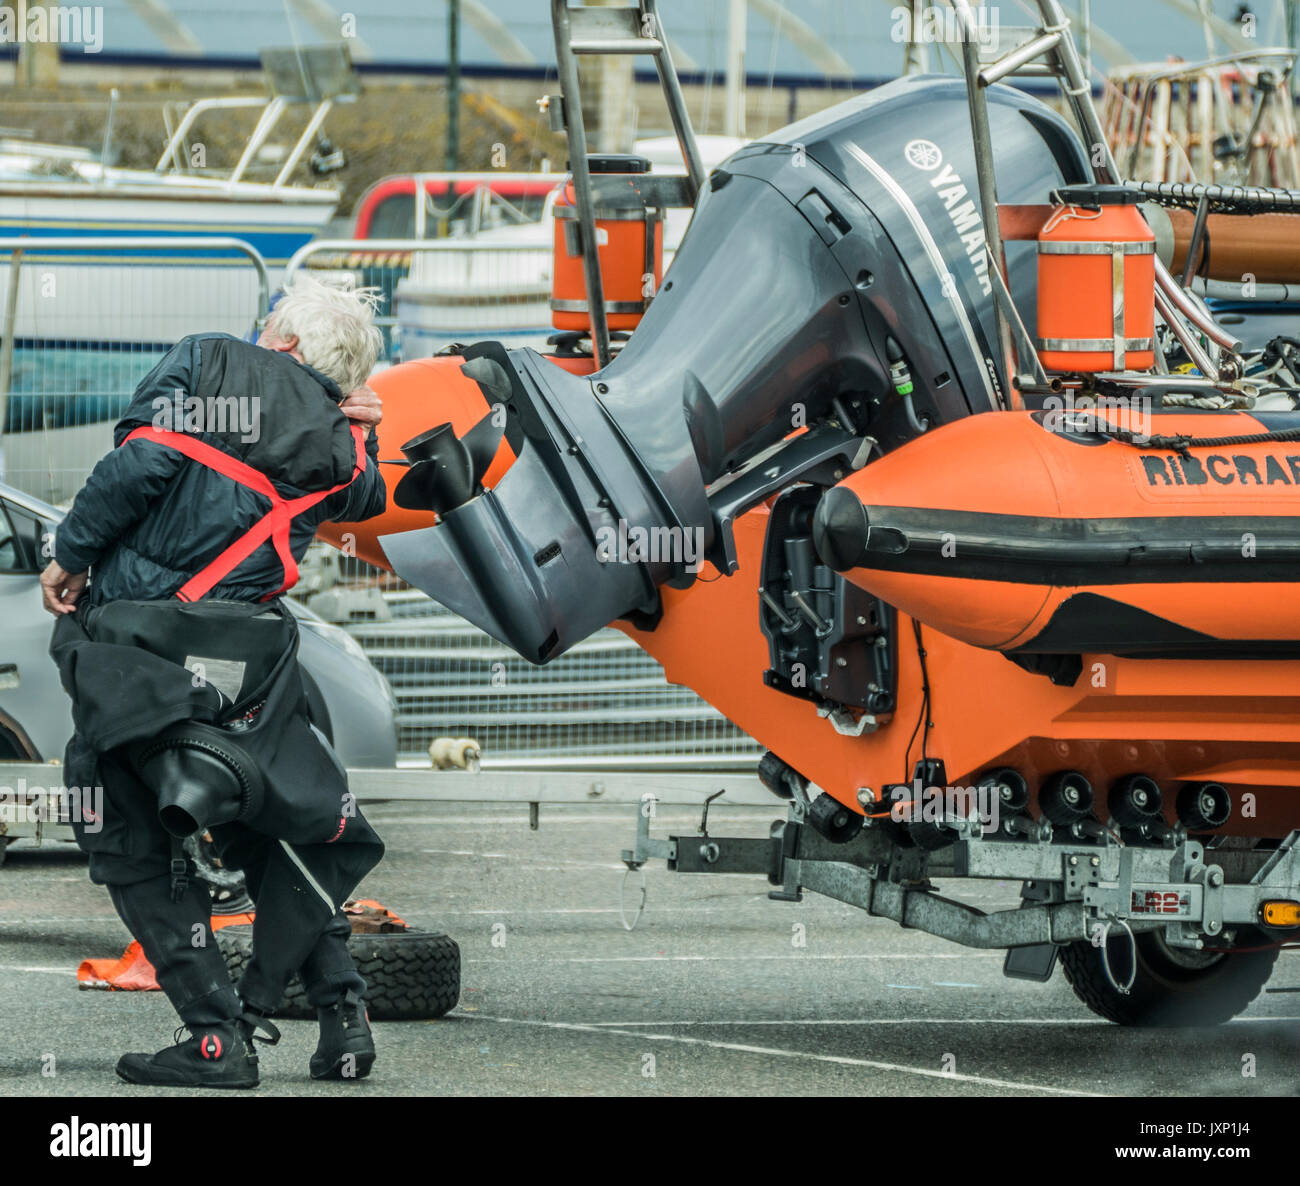 An elderly man squeezing into a diving suit, next to a rigid inflatable boat (RIB) with outboard motor, on a trailer, in Penzance harbour, Stock Photo